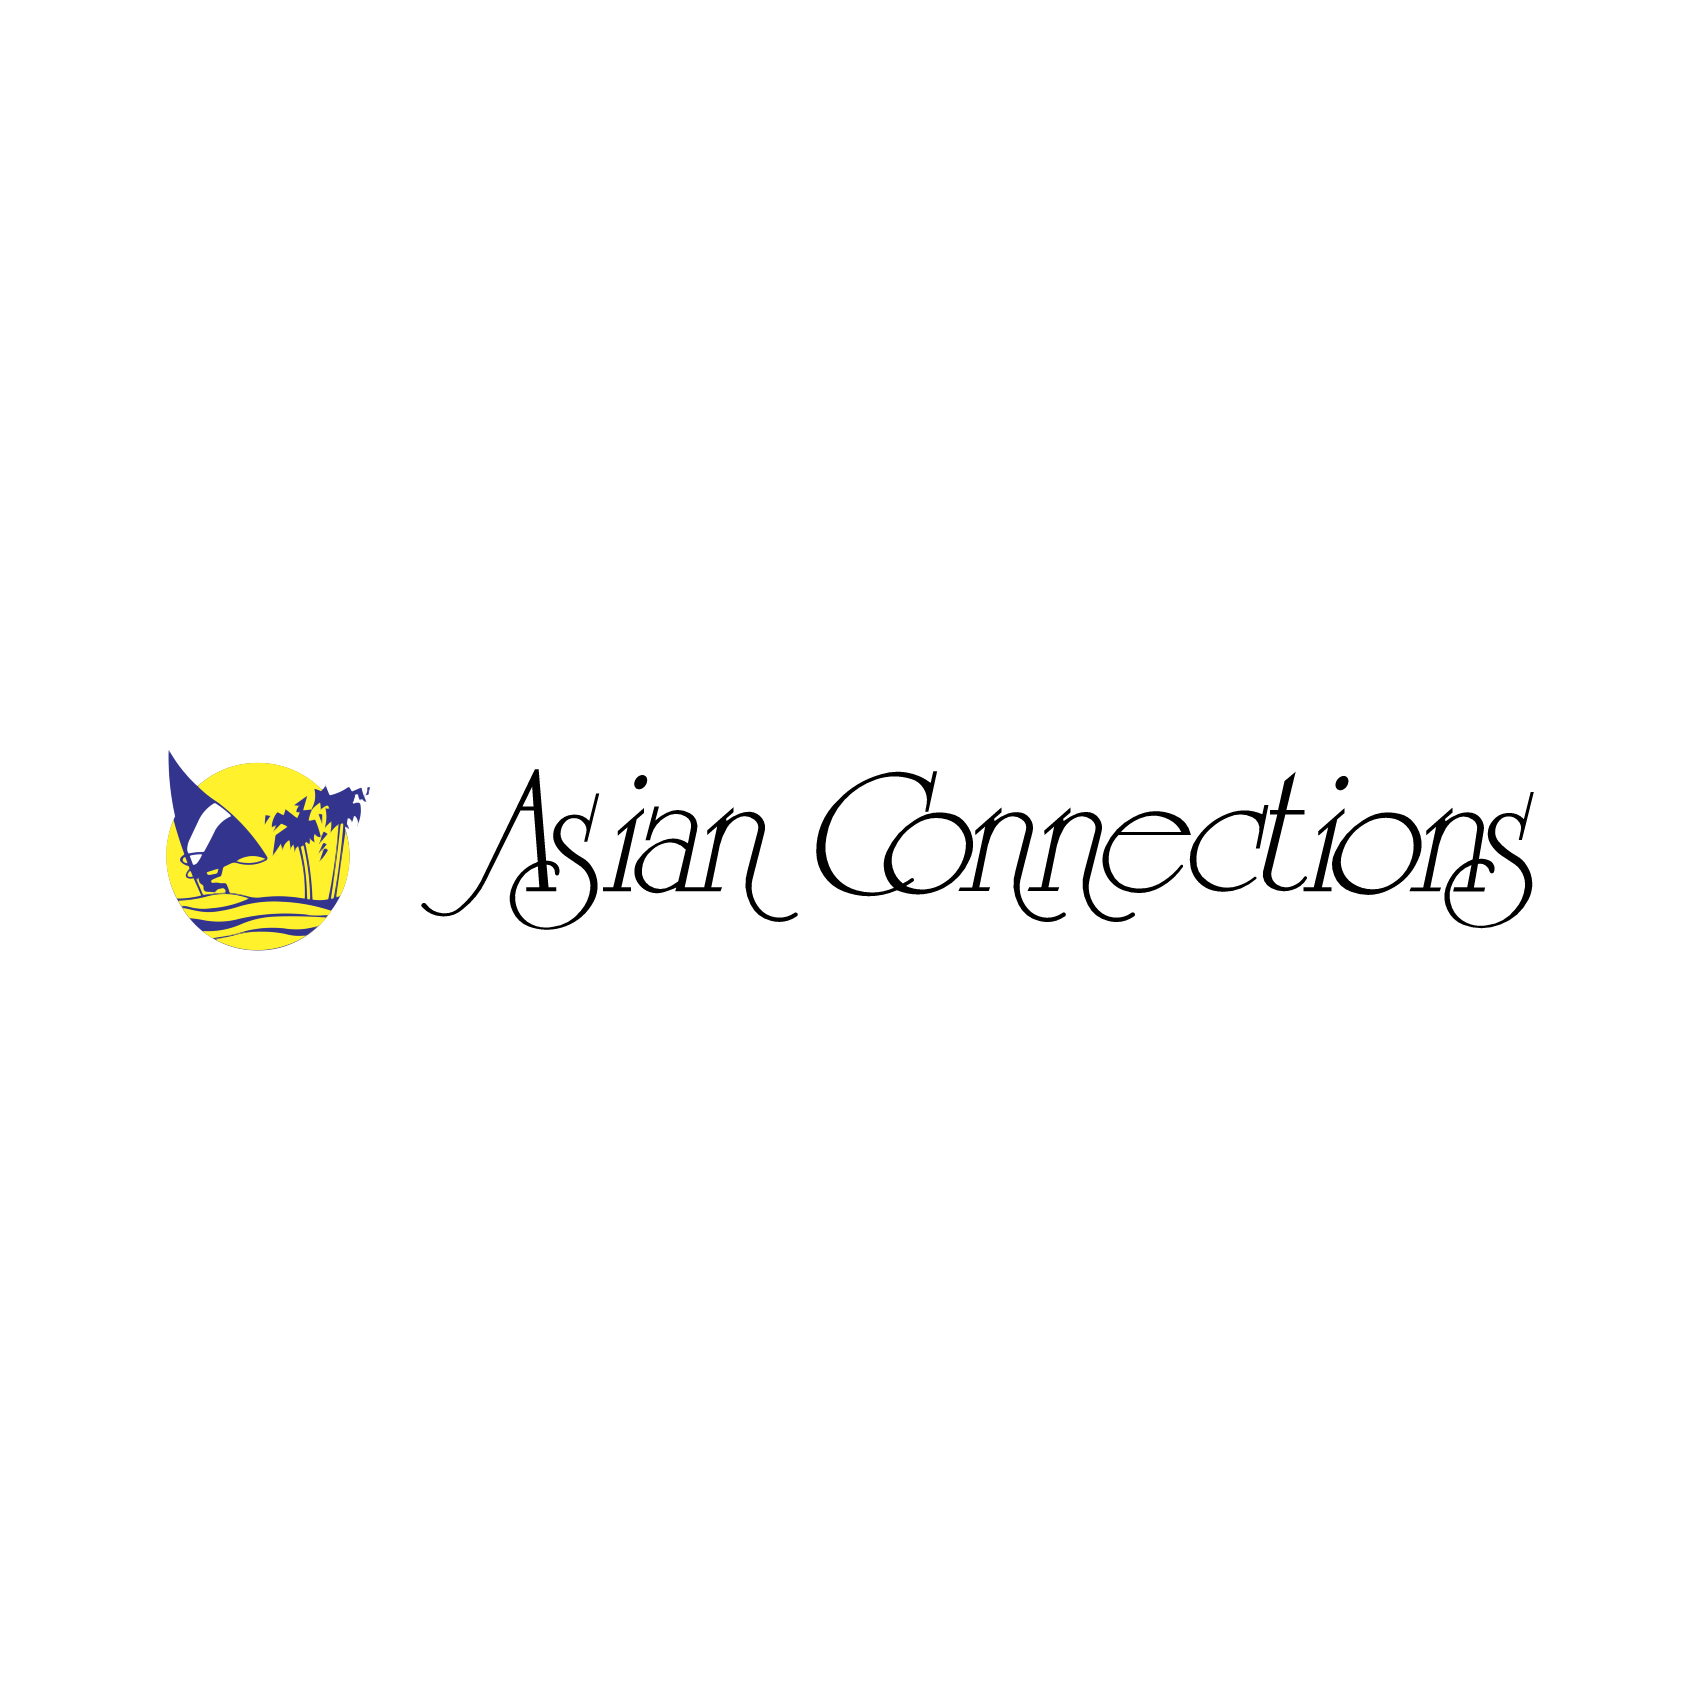 Download Asian Connection Logo PNG and Vector (PDF, SVG, Ai, EPS) Free